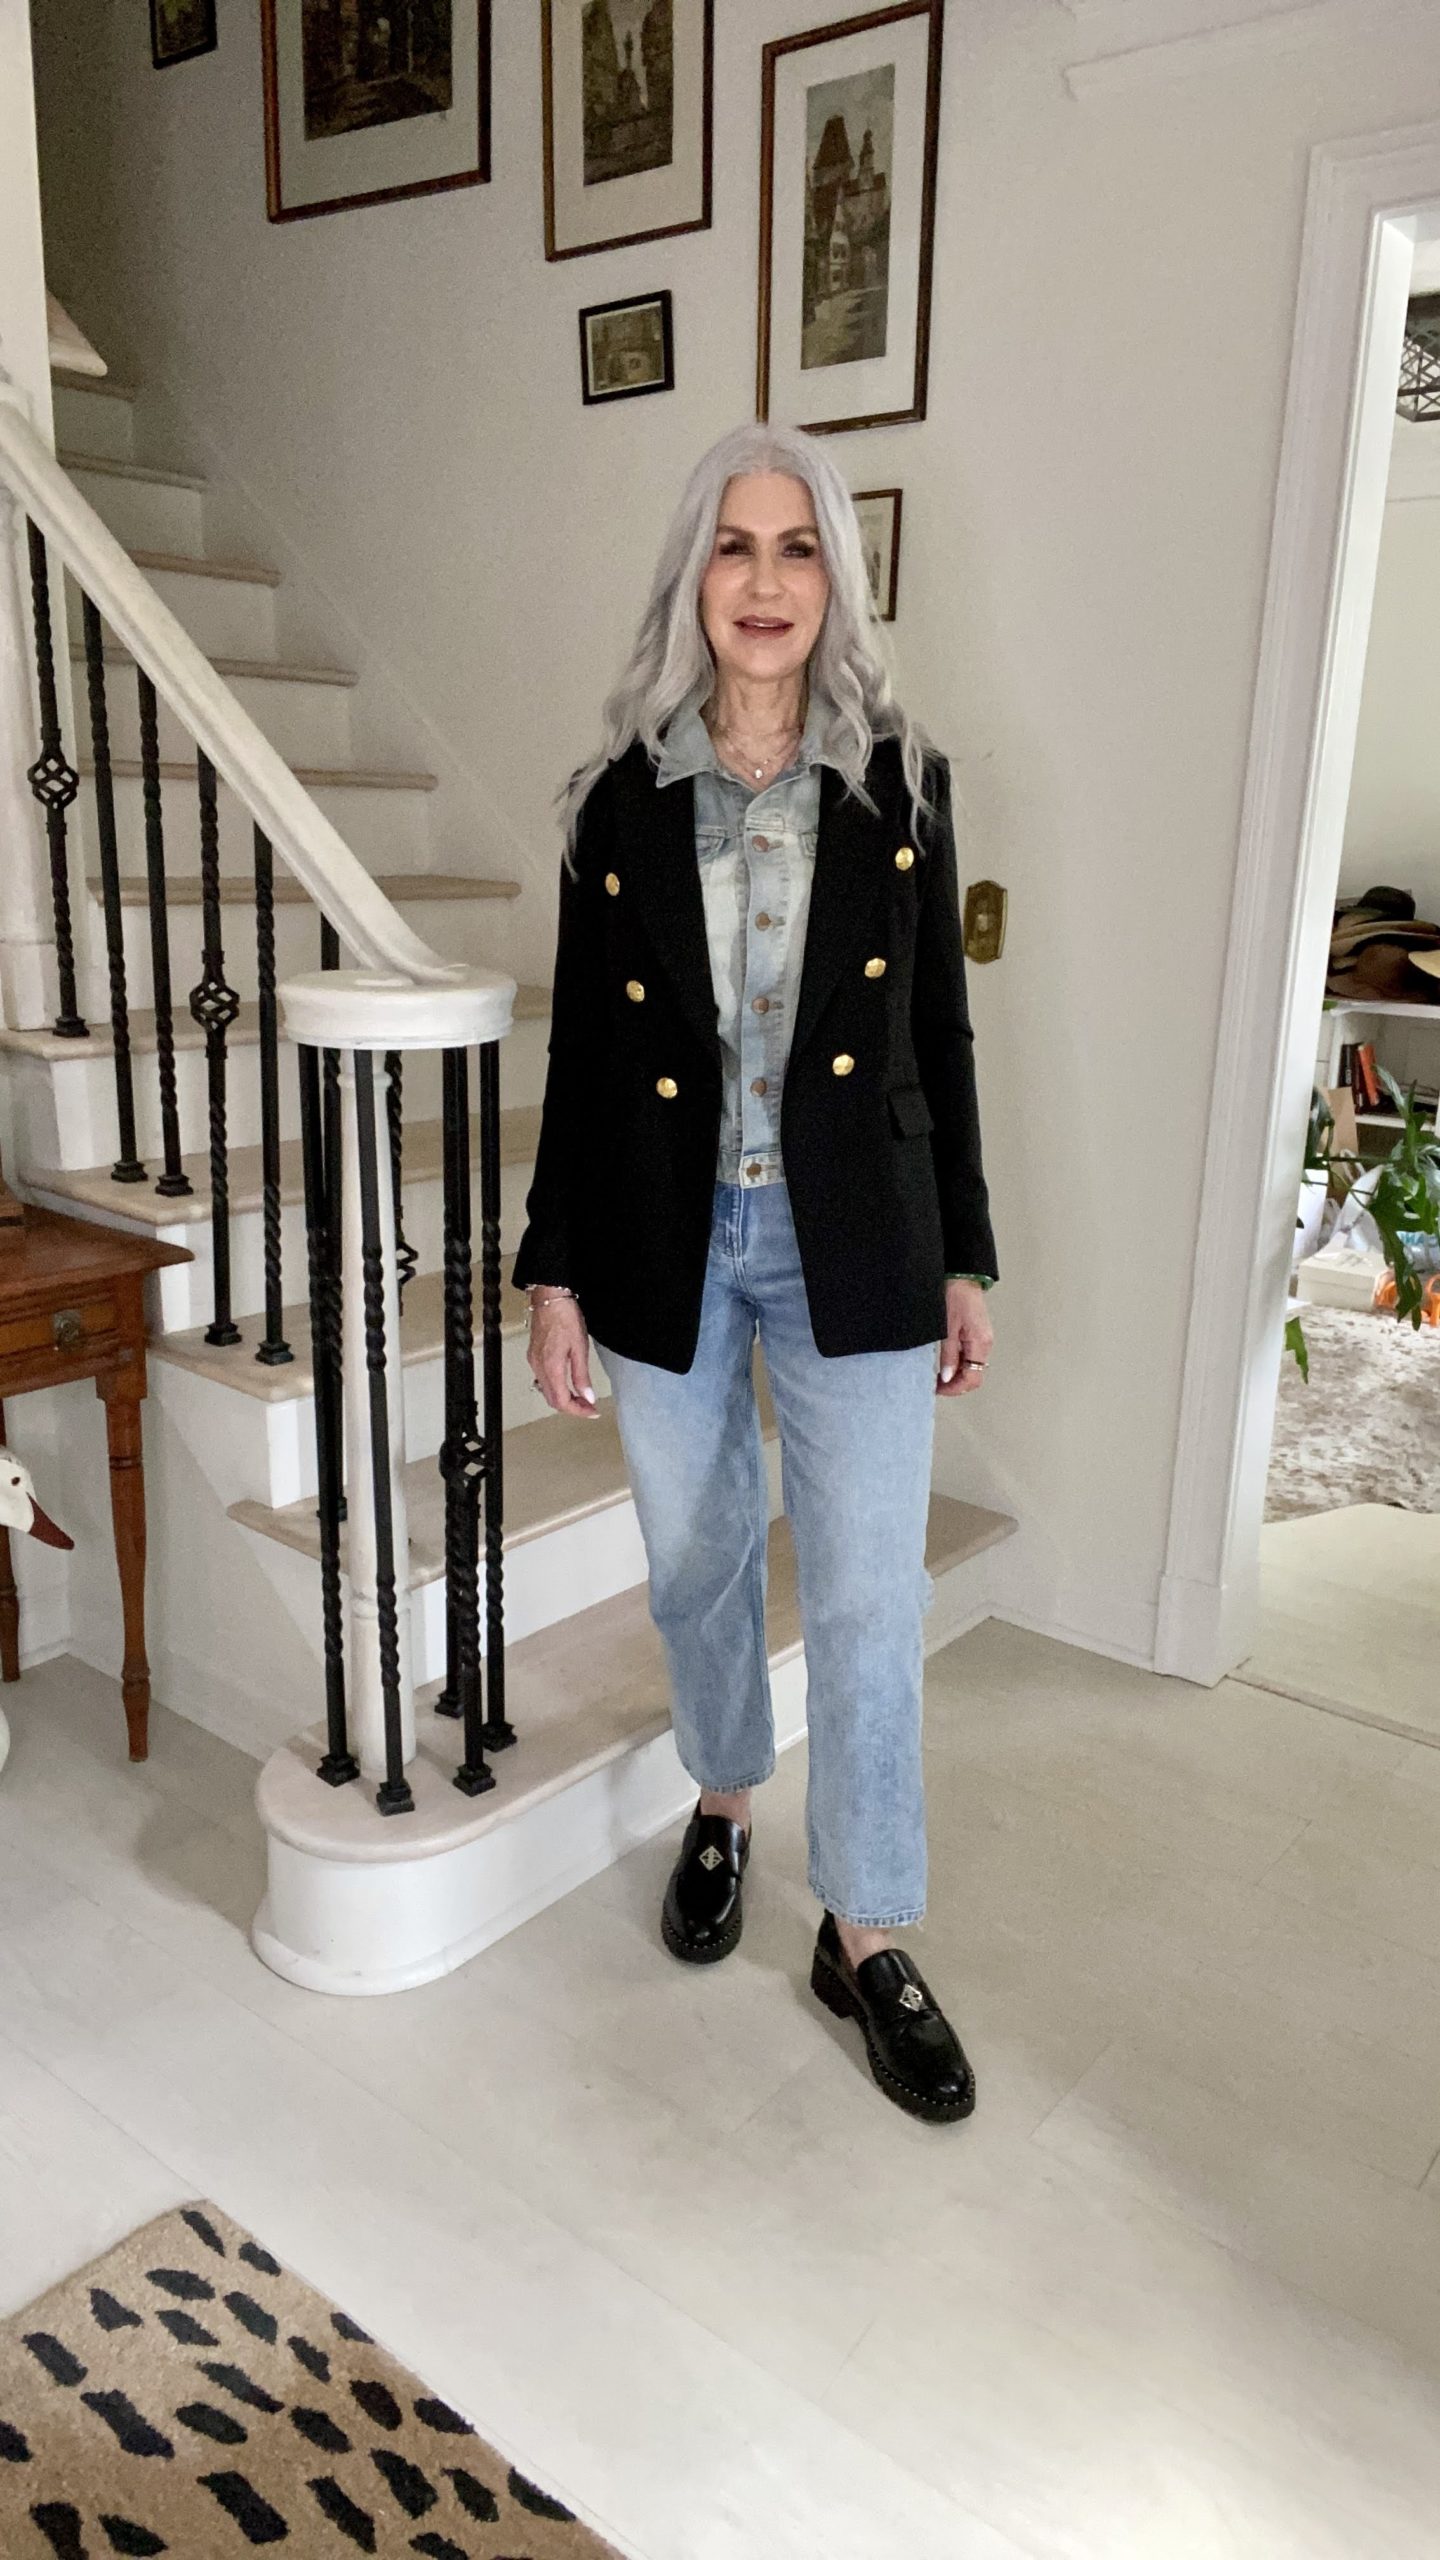 silver hair lady wearing jeans and shirt 